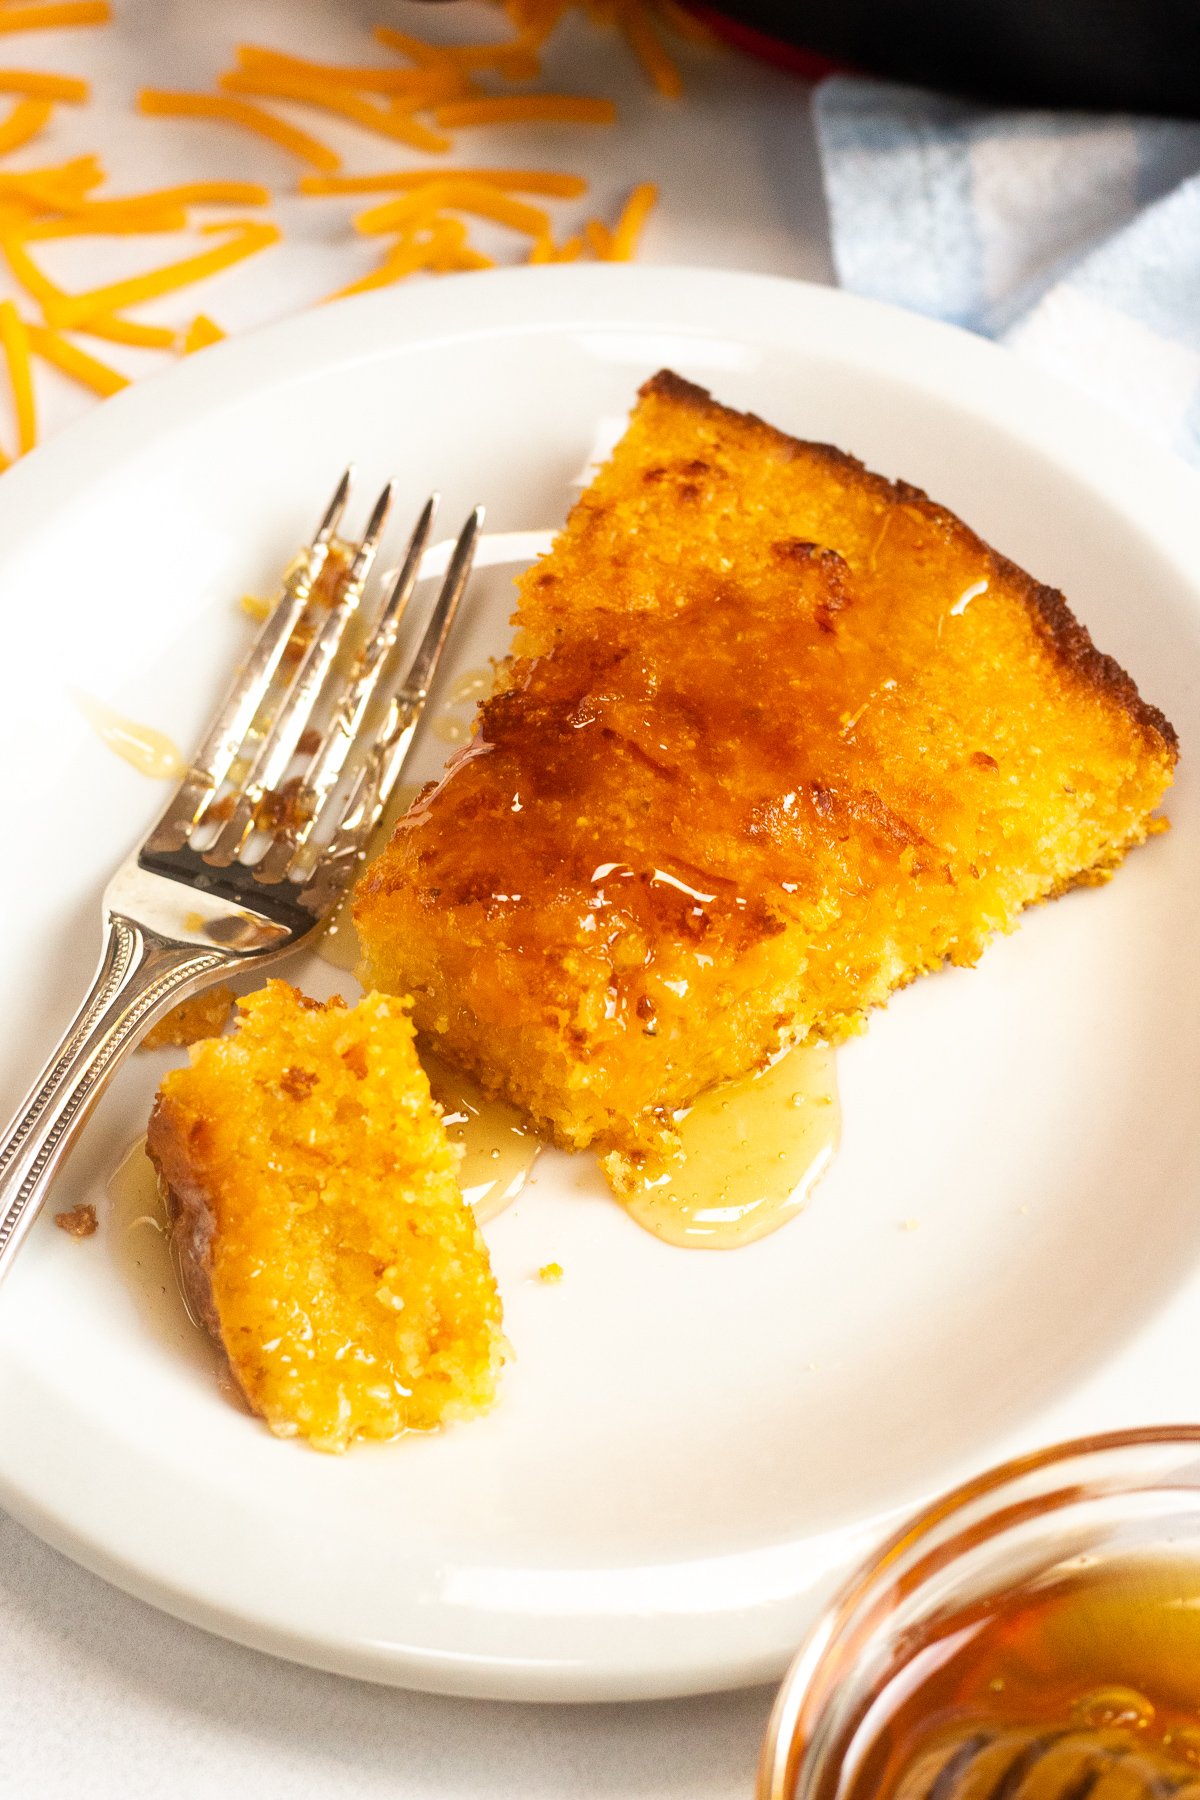 Slice of cornbread on a plate with honey drizzled over top.